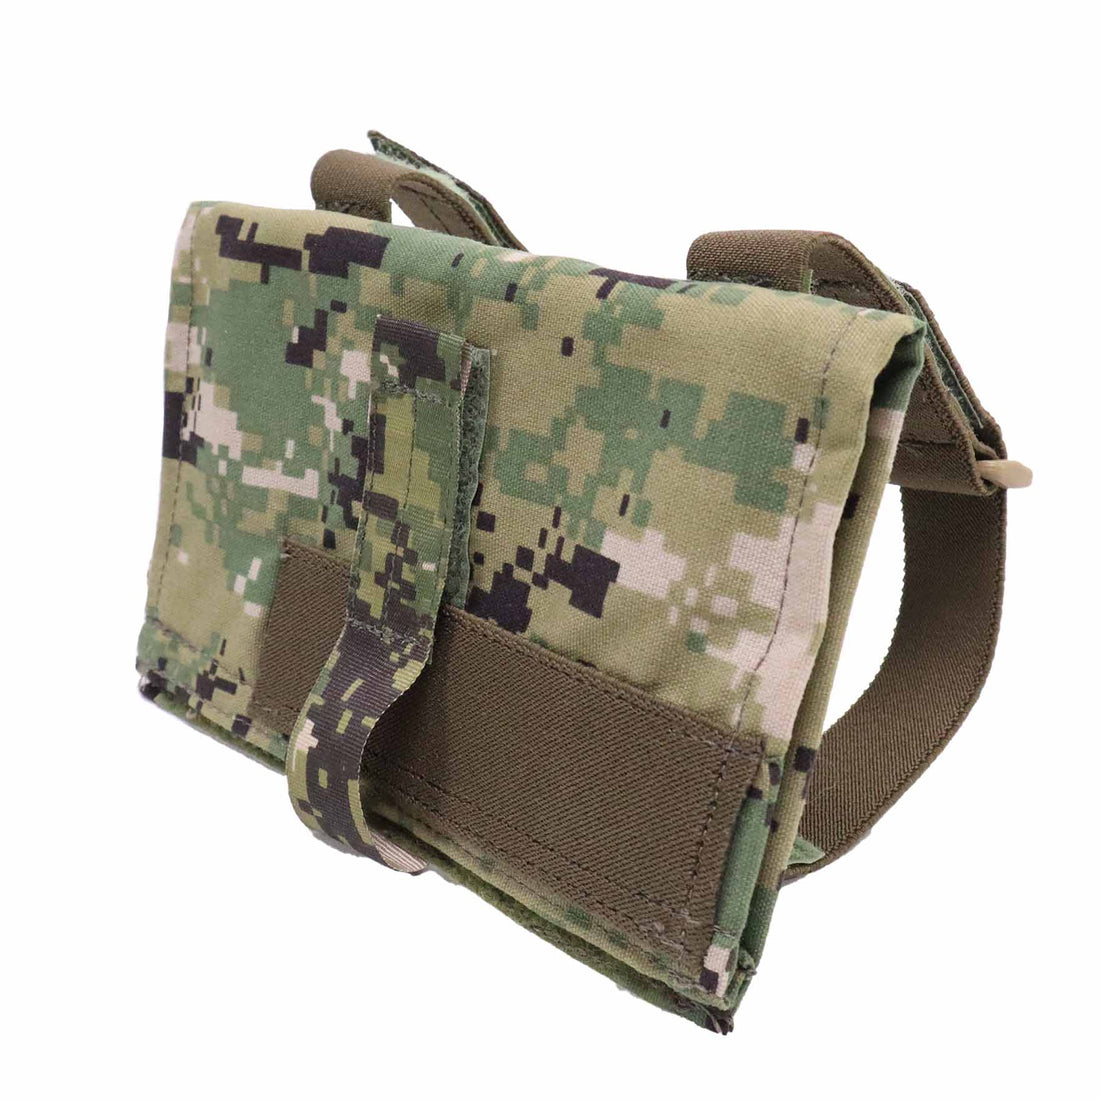 Gear - Pouches - Admin - Eagle Industries SOFLCS Assaulter's Arm Band Sleeve - AOR2